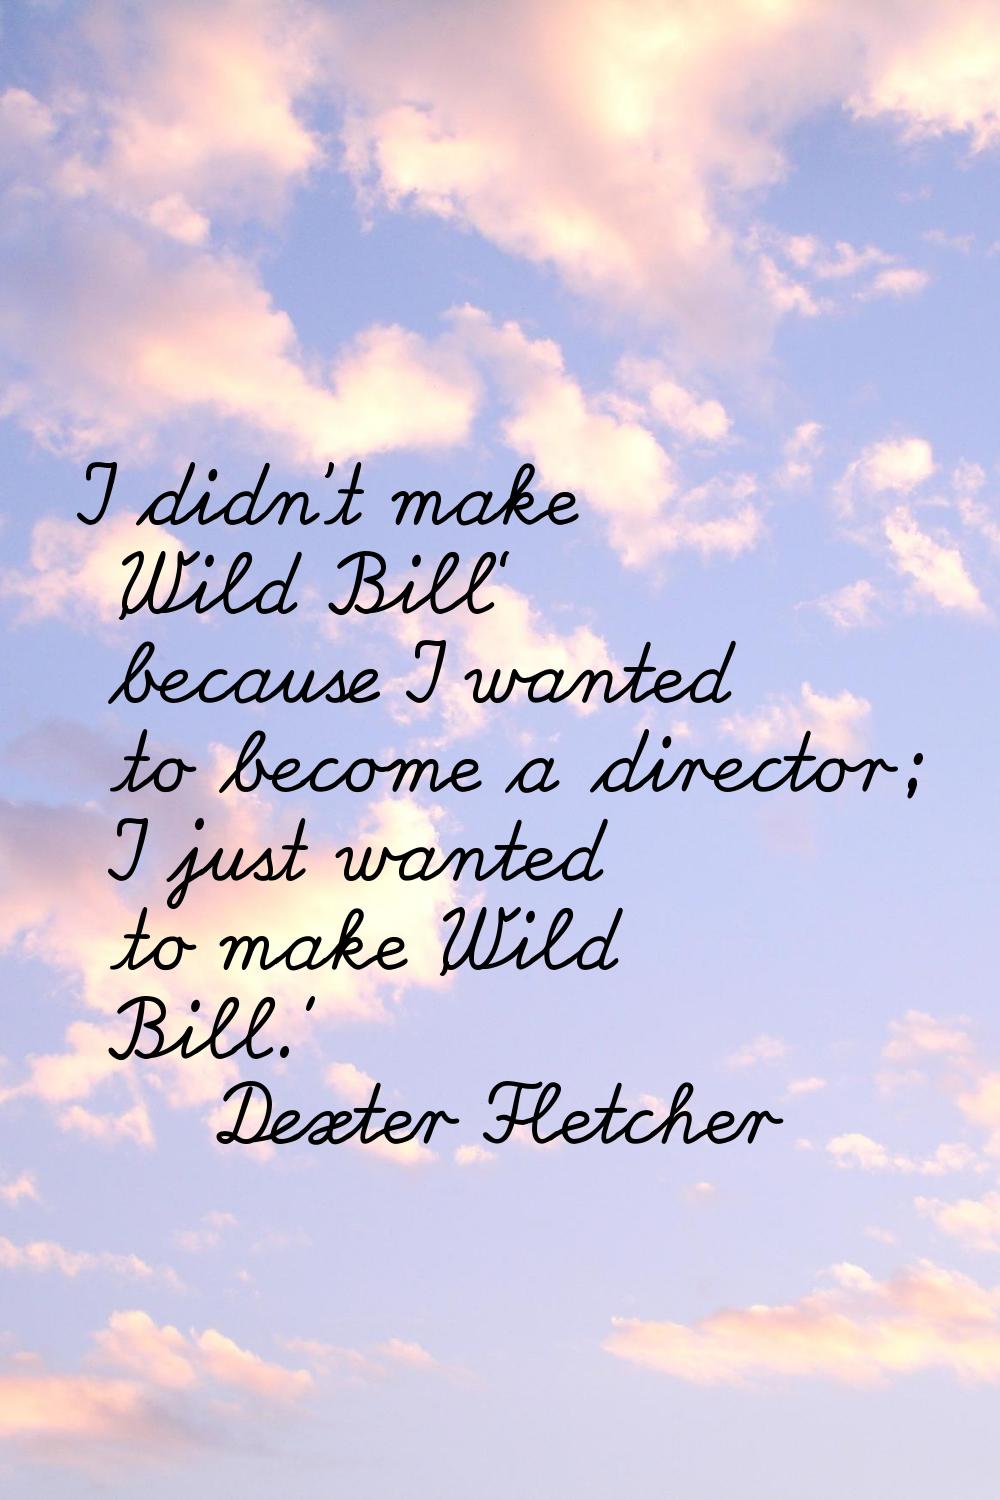 I didn't make 'Wild Bill' because I wanted to become a director; I just wanted to make 'Wild Bill.'